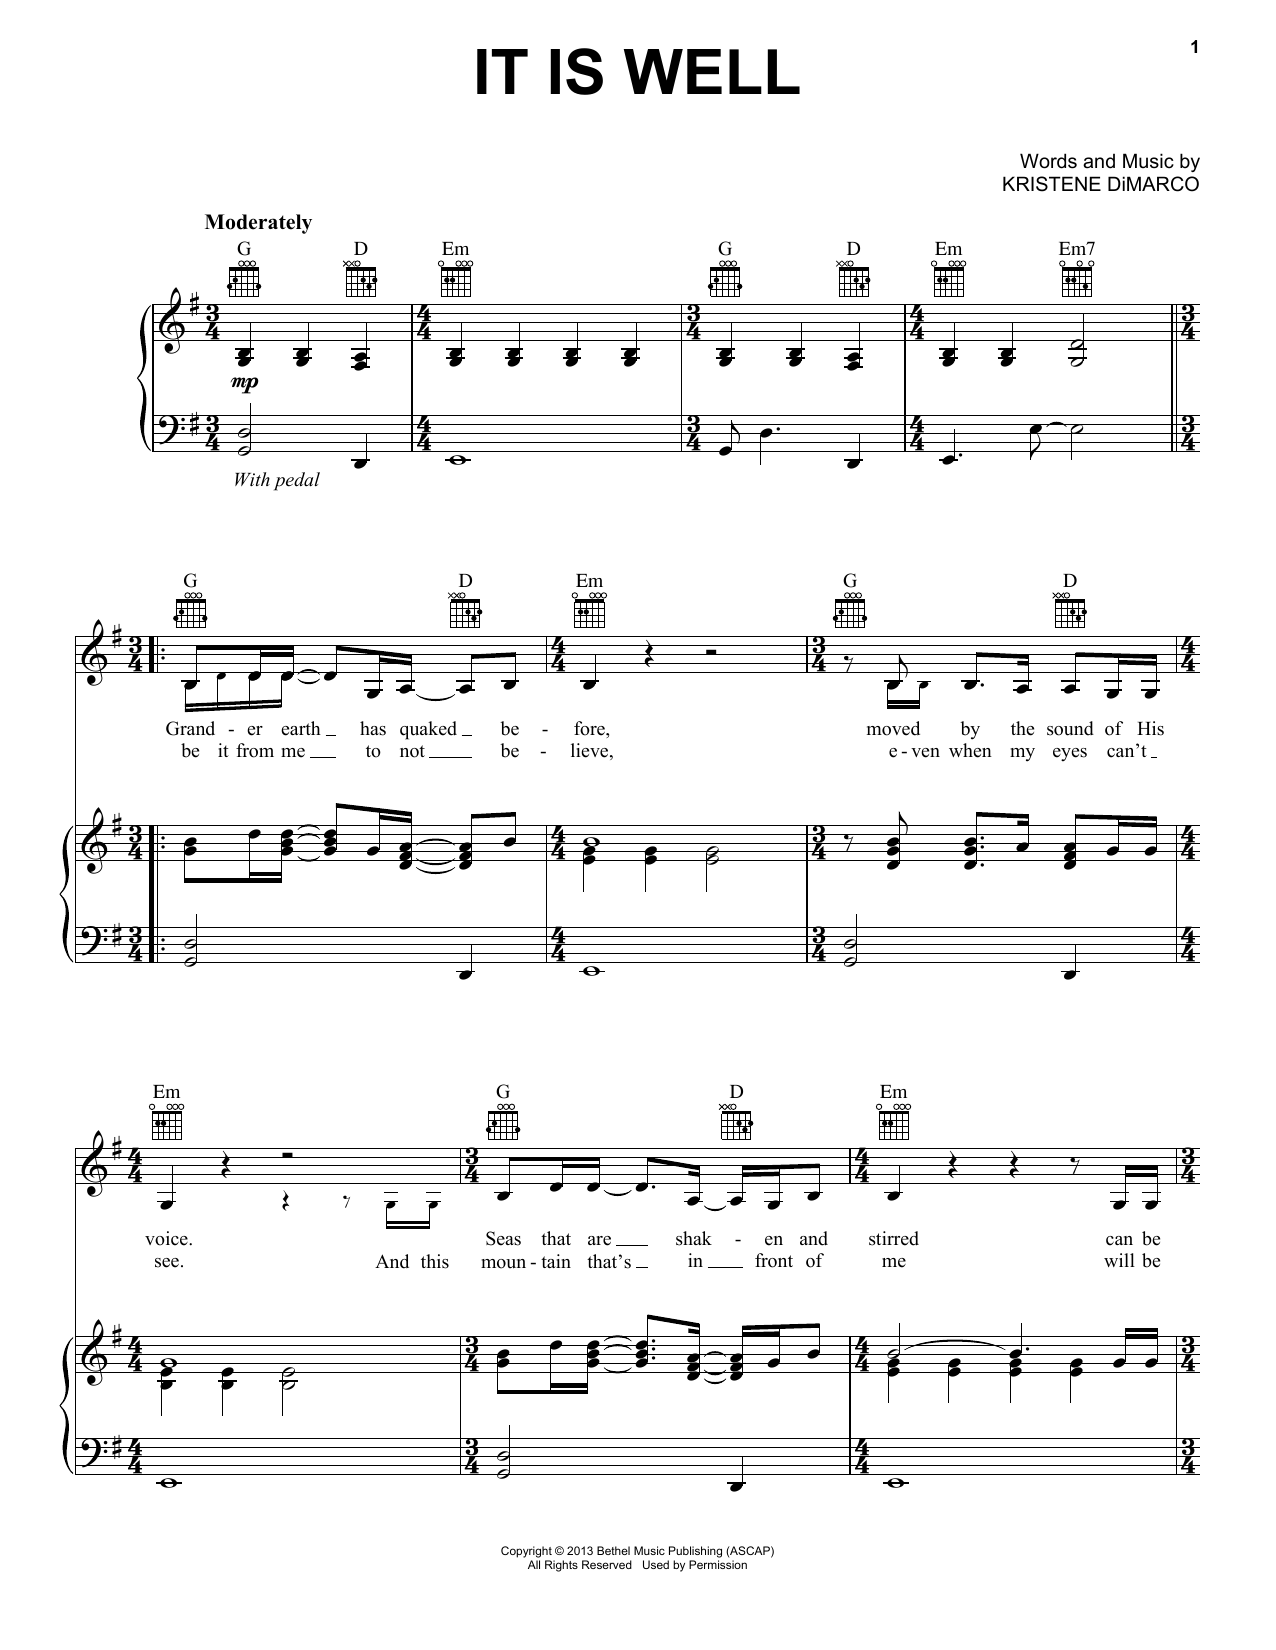 Bethel Music "It Is Well" Sheet Music PDF Notes, Chords | Pop Score